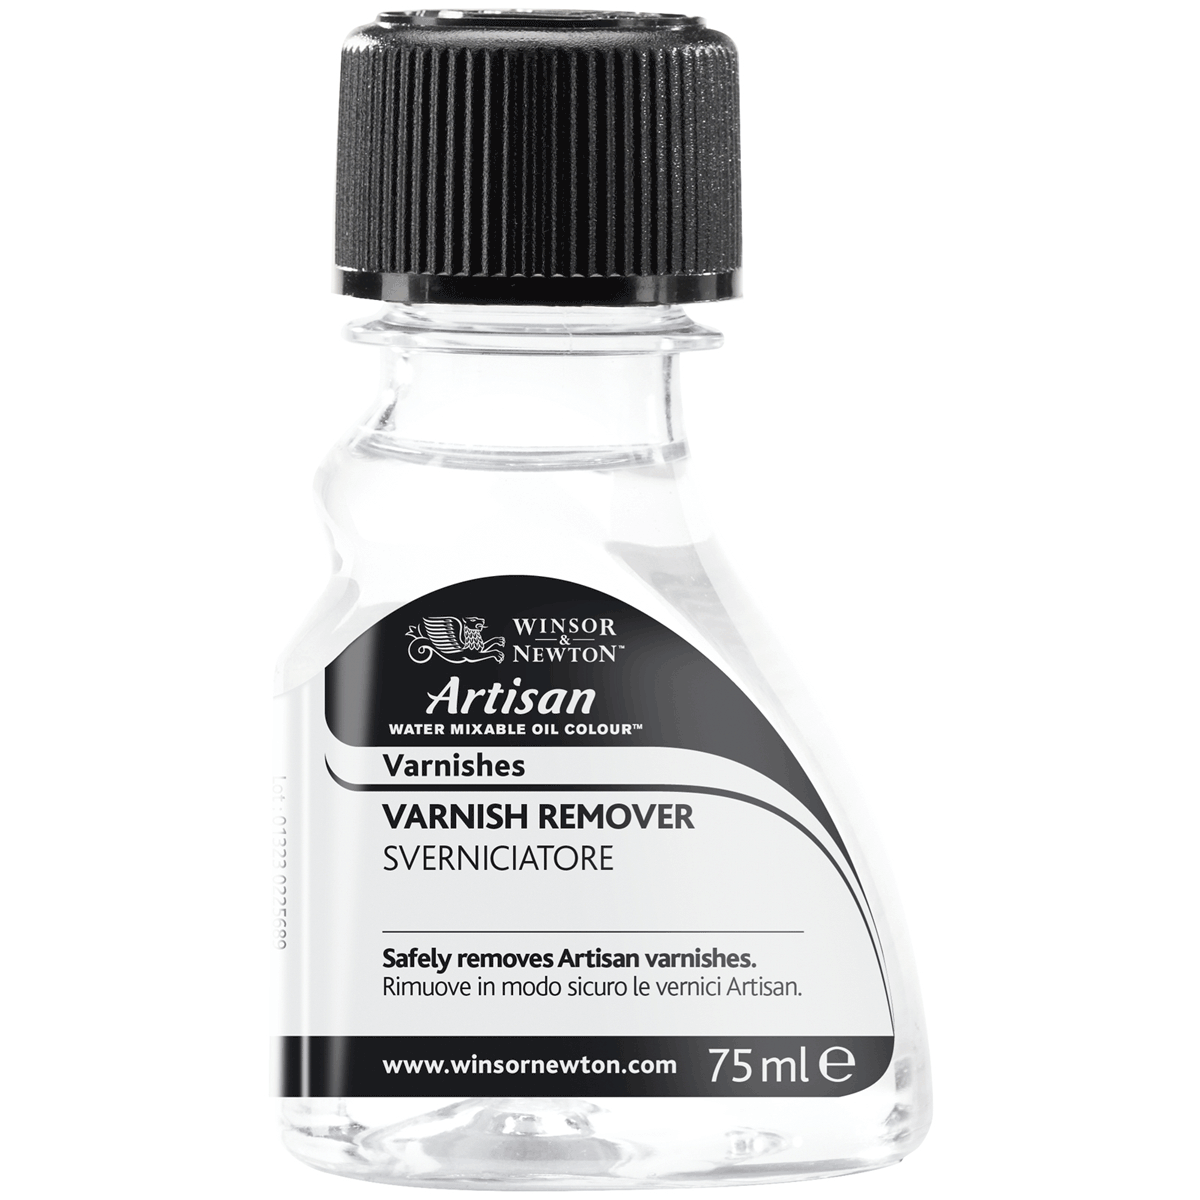 Artisan Water Mixable Varnish Remover 75ml